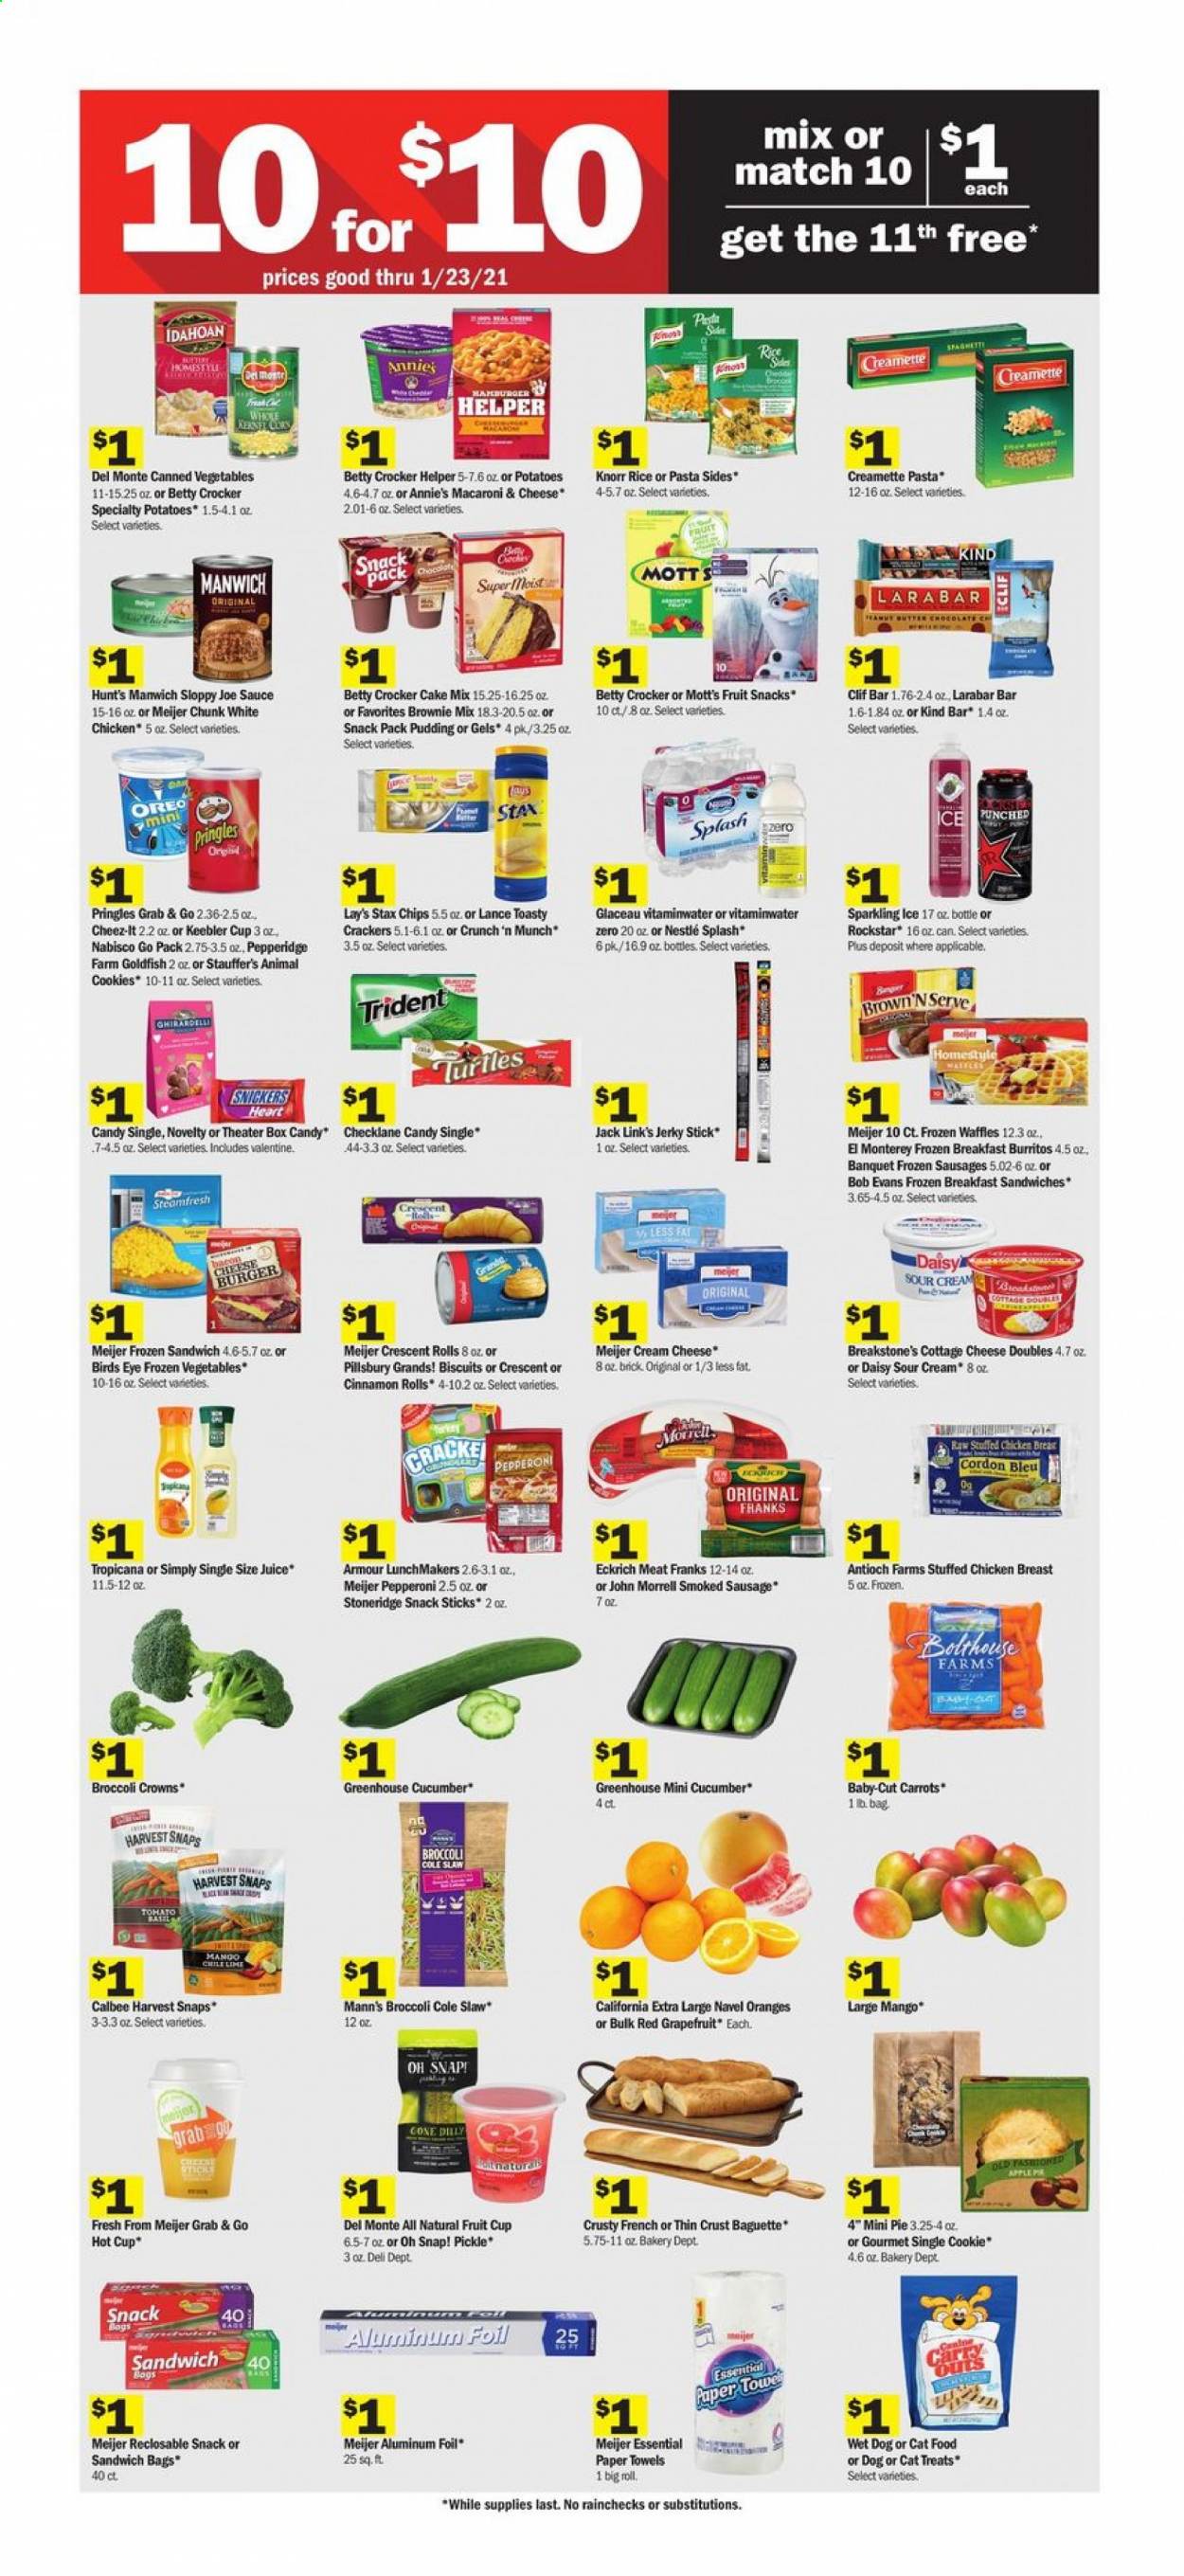 thumbnail - Meijer Flyer - 01/17/2021 - 01/23/2021 - Sales products - baguette, brownie mix, cake mix, cinnamon roll, crescent rolls, pie, waffles, oranges, cream cheese, macaroni & cheese, sandwich, hamburger, Knorr, sauce, Pillsbury, Bird's Eye, Annie's, pasta sides, Bob Evans, stuffed chicken, bacon, jerky, sausage, smoked sausage, pepperoni, cottage cheese, pudding, Oreo, sour cream, carrots, frozen vegetables, mango, cordon bleu, cookies, Nestlé, Snickers, crackers, biscuit, Trident, fruit snack, Ghirardelli, Keebler, Pringles, Lay’s, Goldfish, Cheez-It, Harvest Snaps, Jack Link's, cucumber, canned vegetables, Manwich, pasta, Creamette, juice, Mott's, Rockstar, chicken breasts, kitchen towels, paper towels, aluminium foil, animal food, cat food, Apple. Page 2.